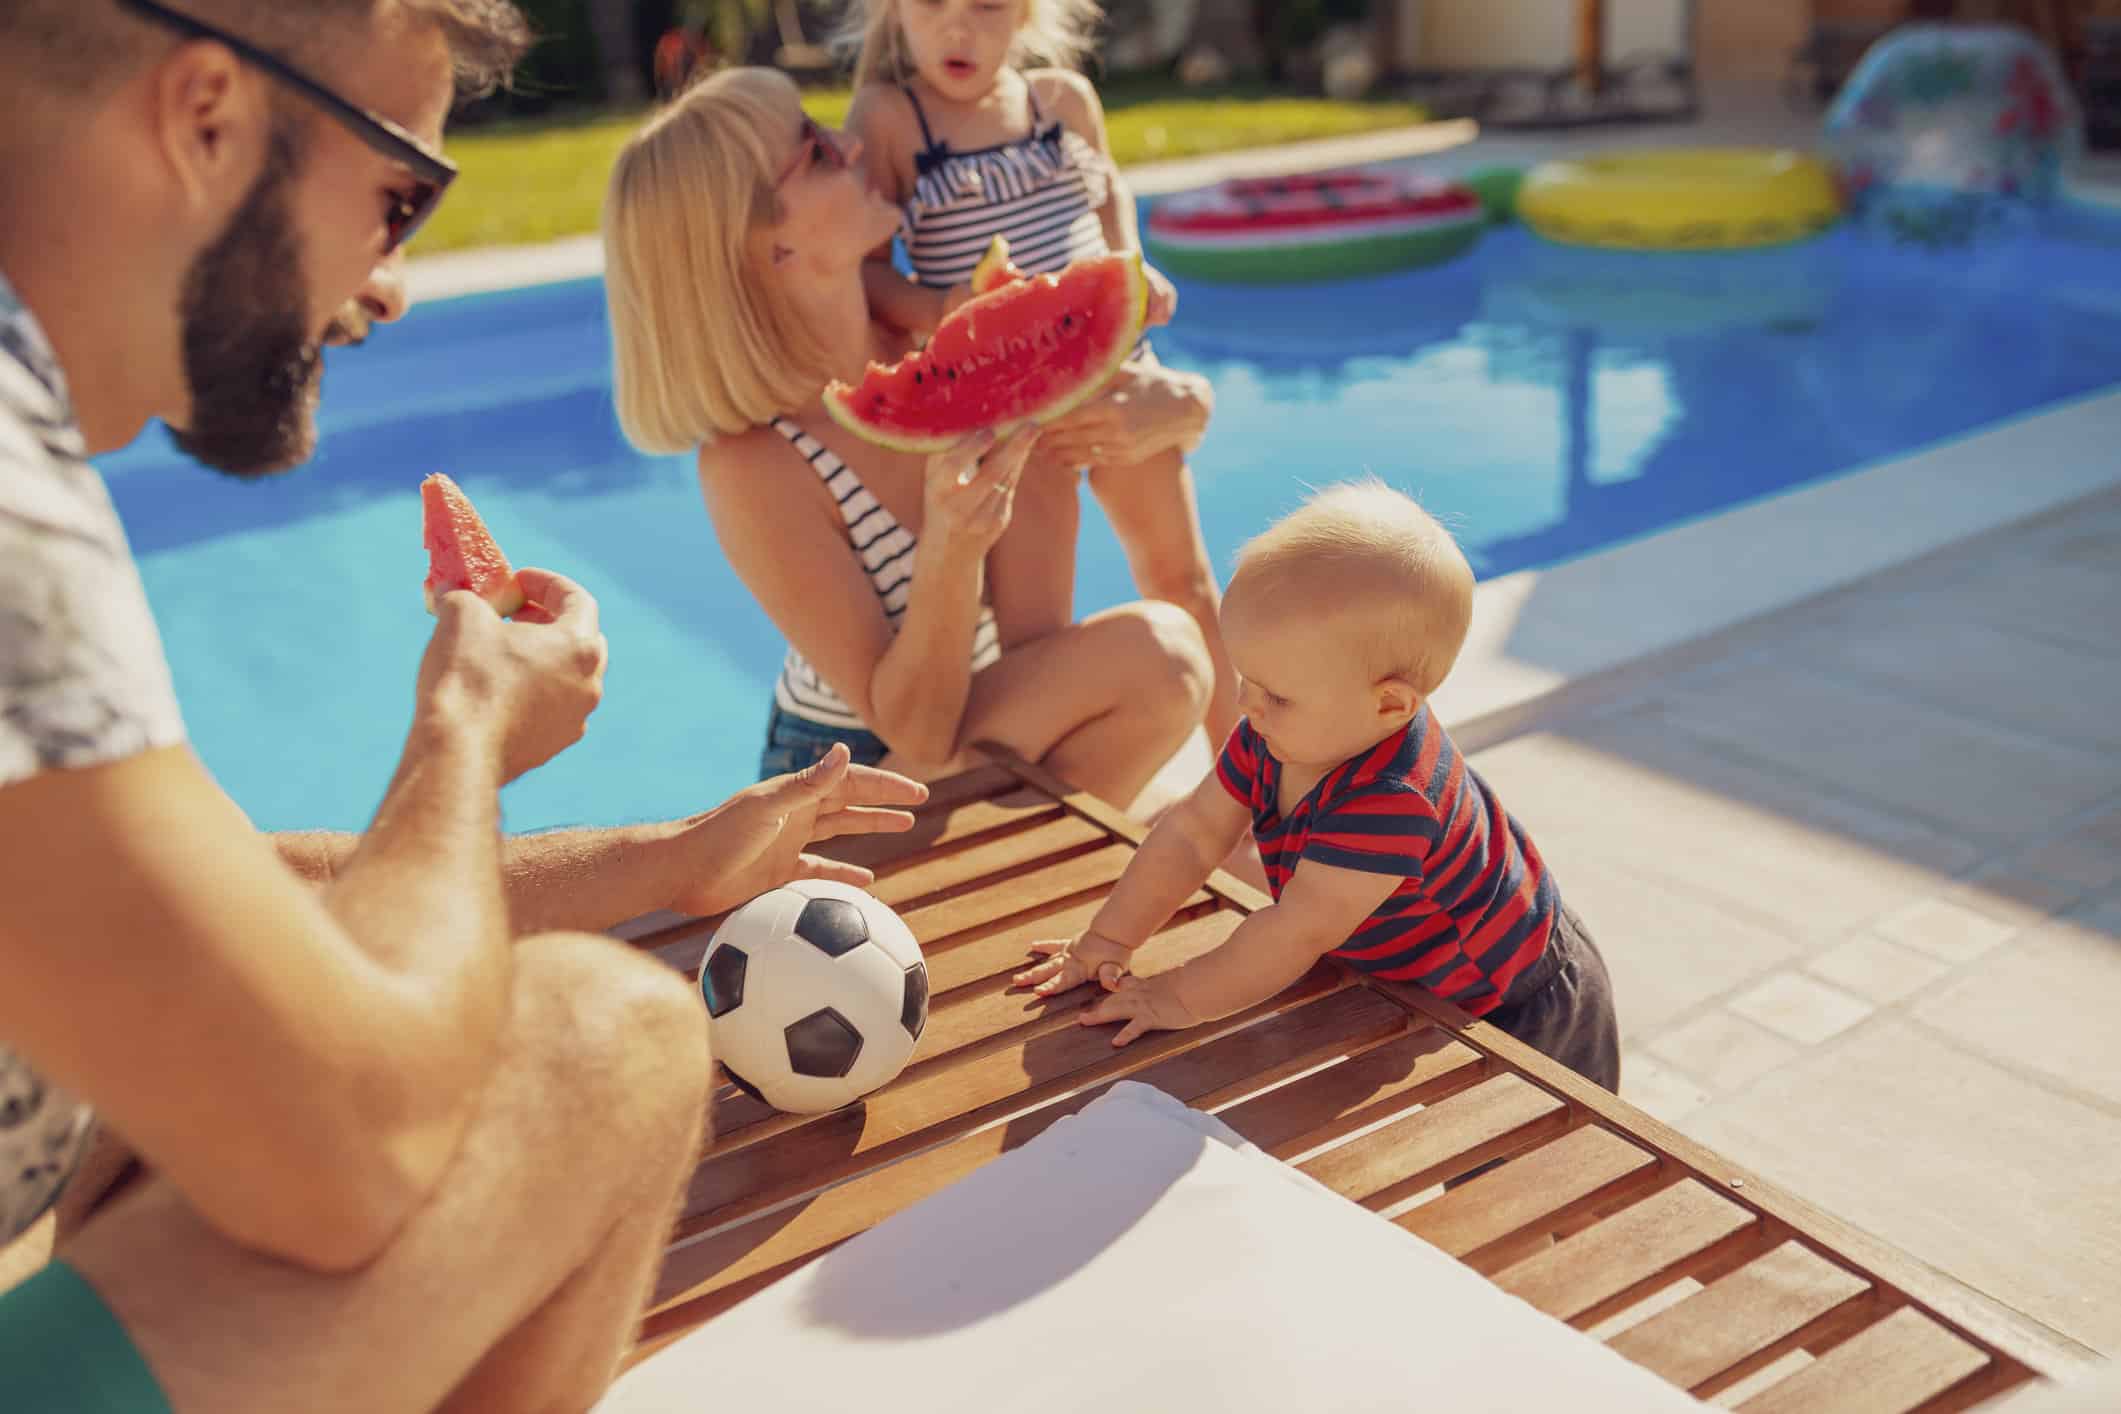 Get a new inground pool for your family with Mastercraft Pool & Spa.